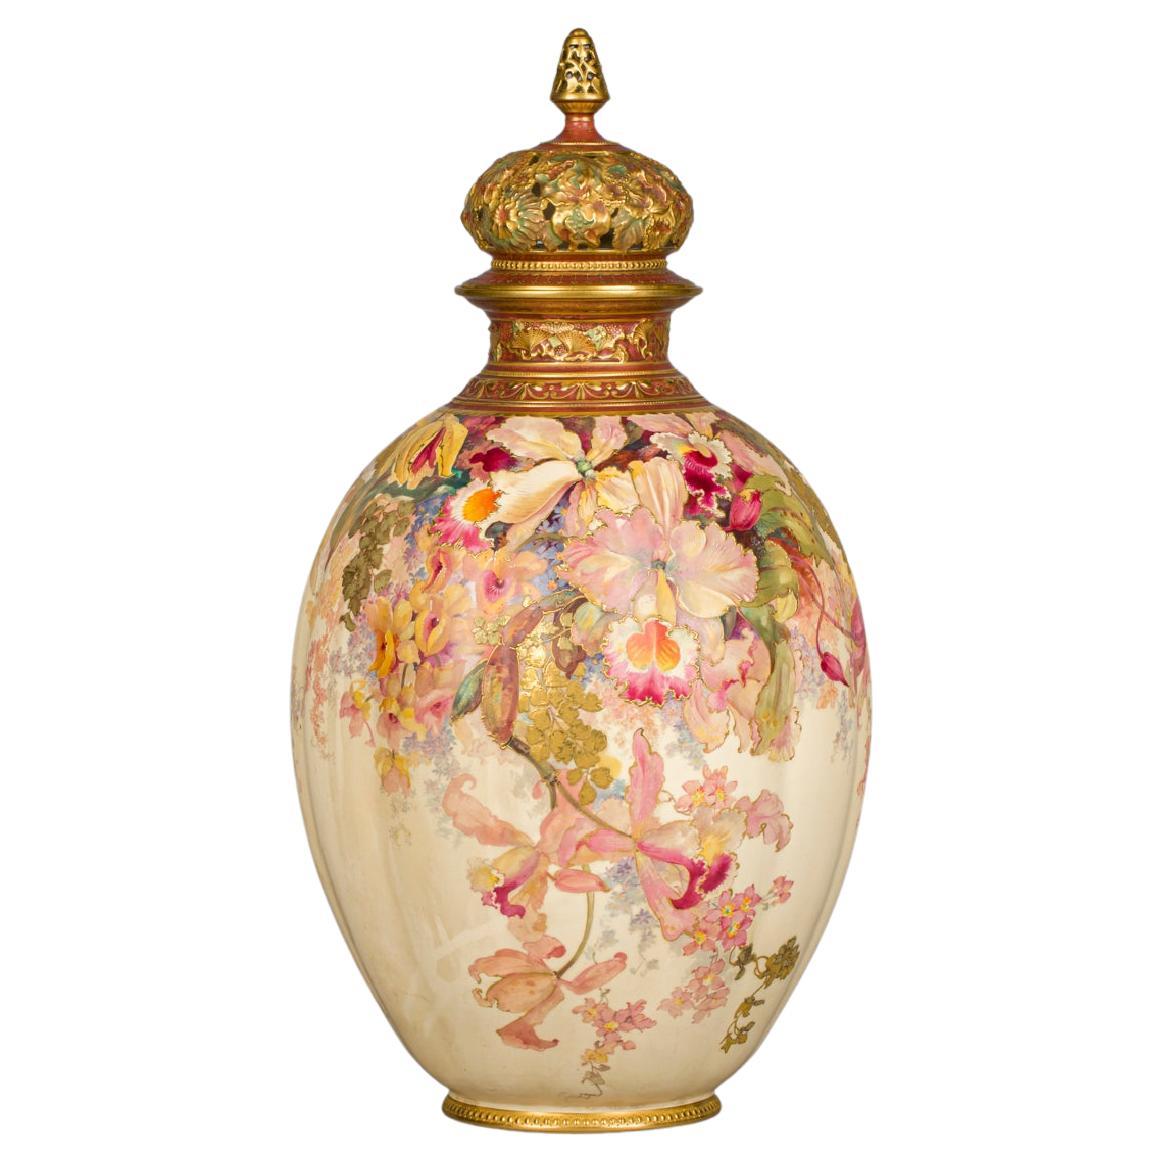 Large Royal Crown Derby Covered Jar, 19th century